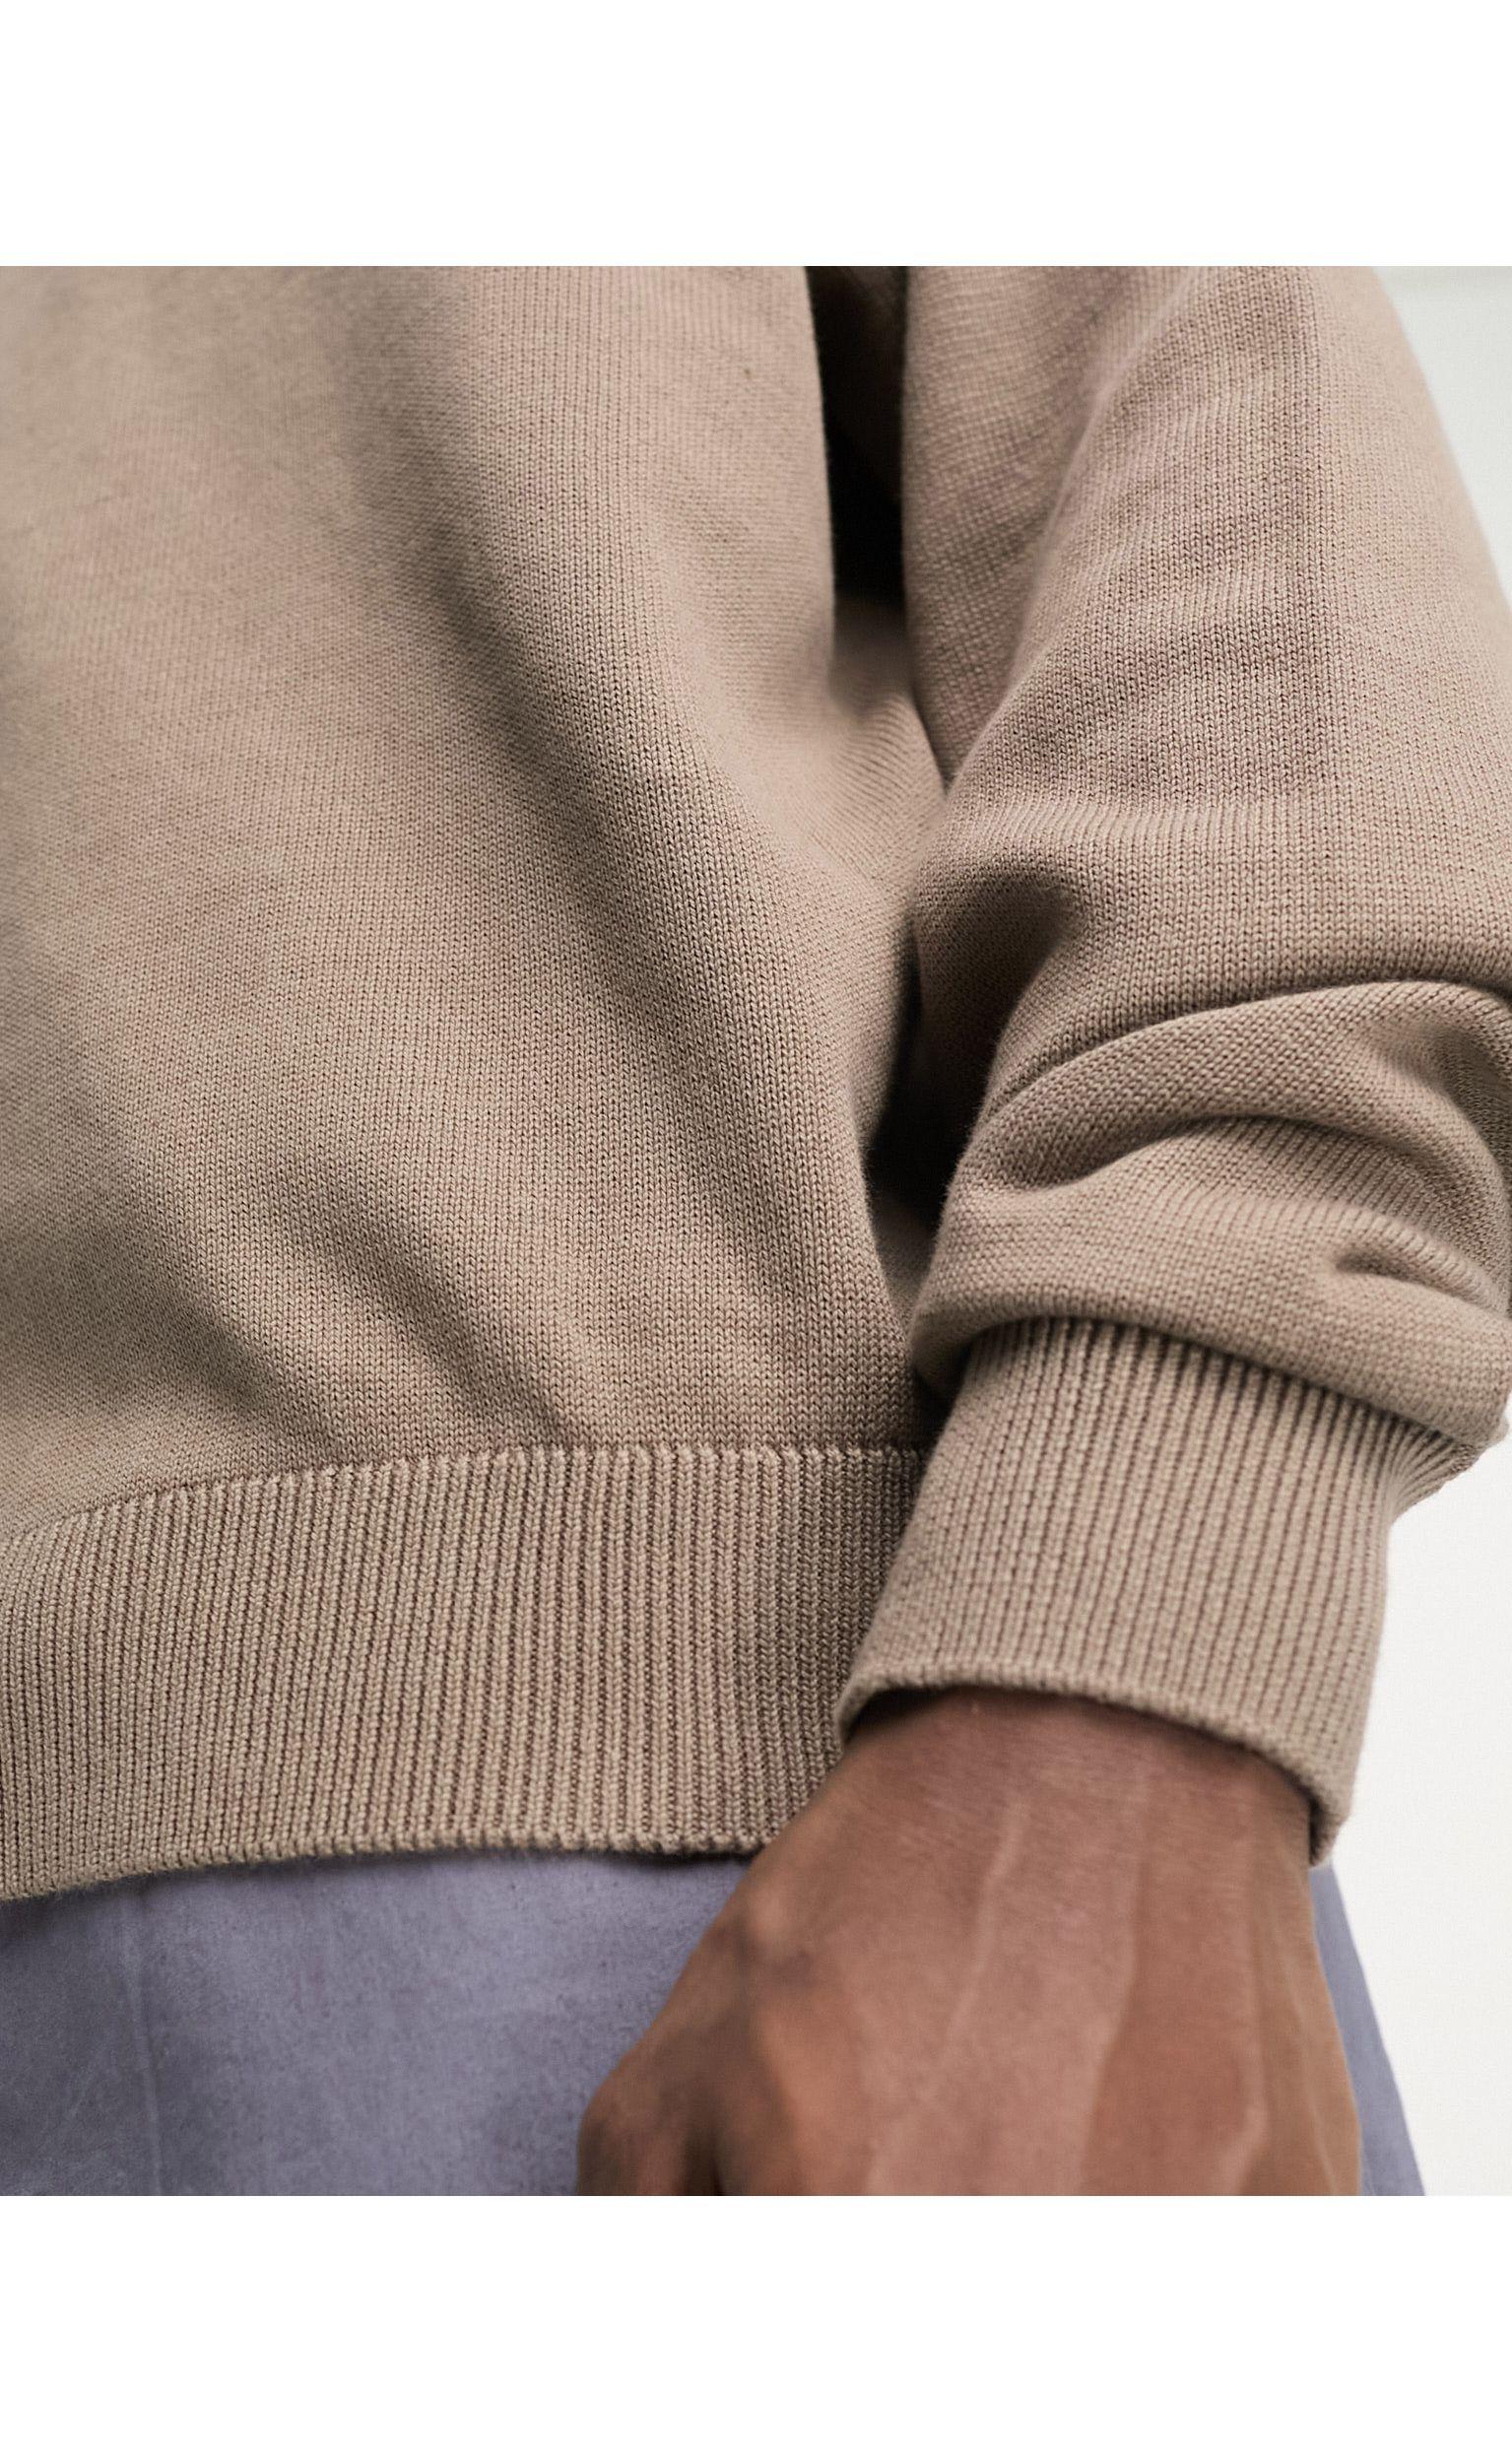 ADPT Oversized Crew Neck Sweater in Natural for Men | Lyst